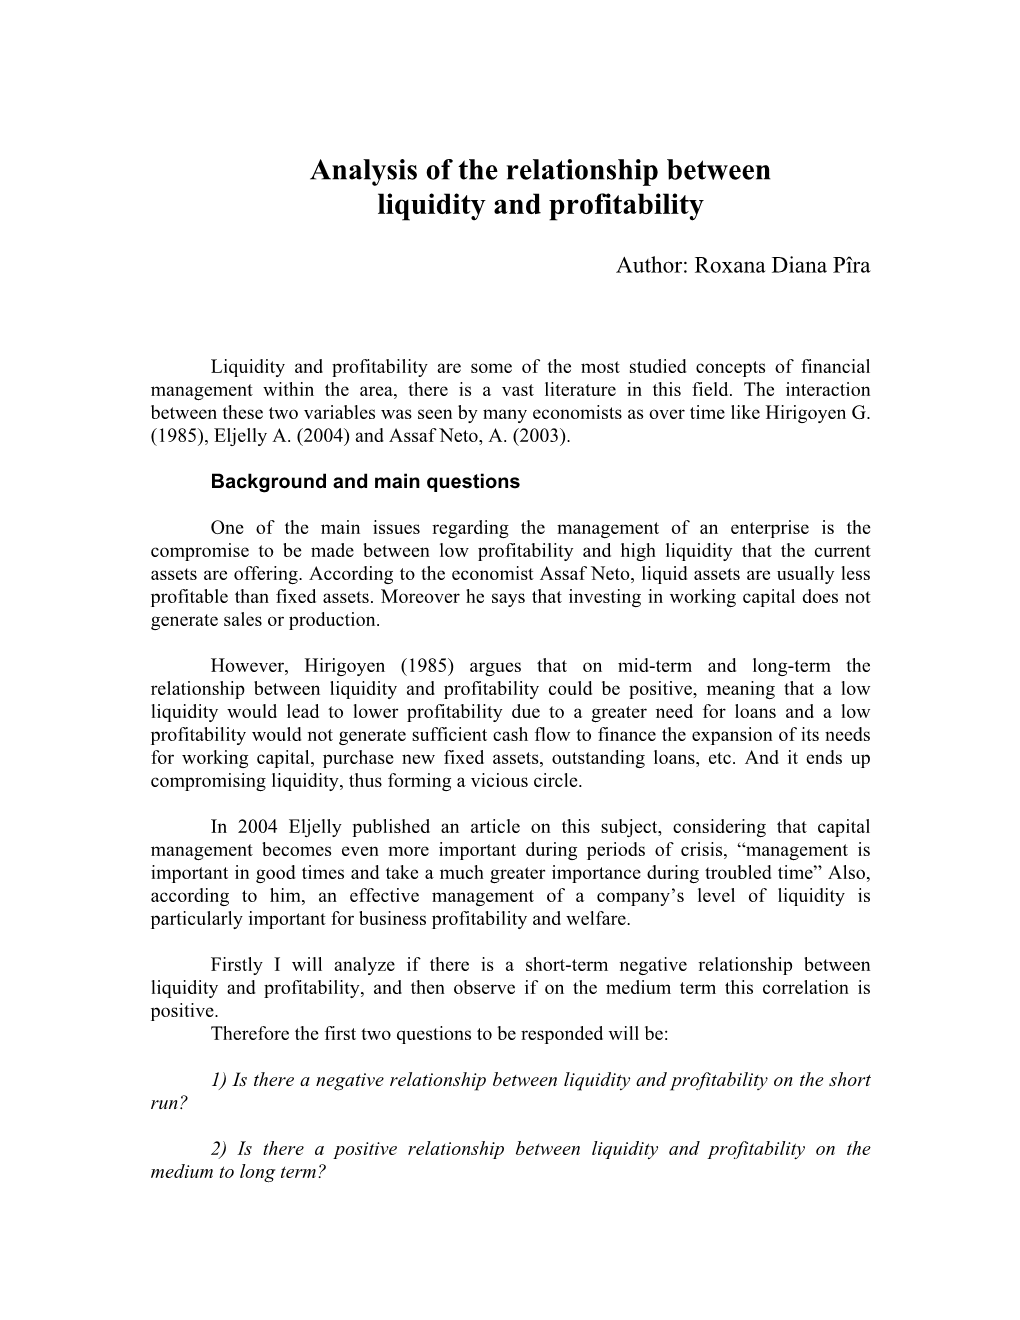 Analysis of the Relationship Between Liquidity and Profitability